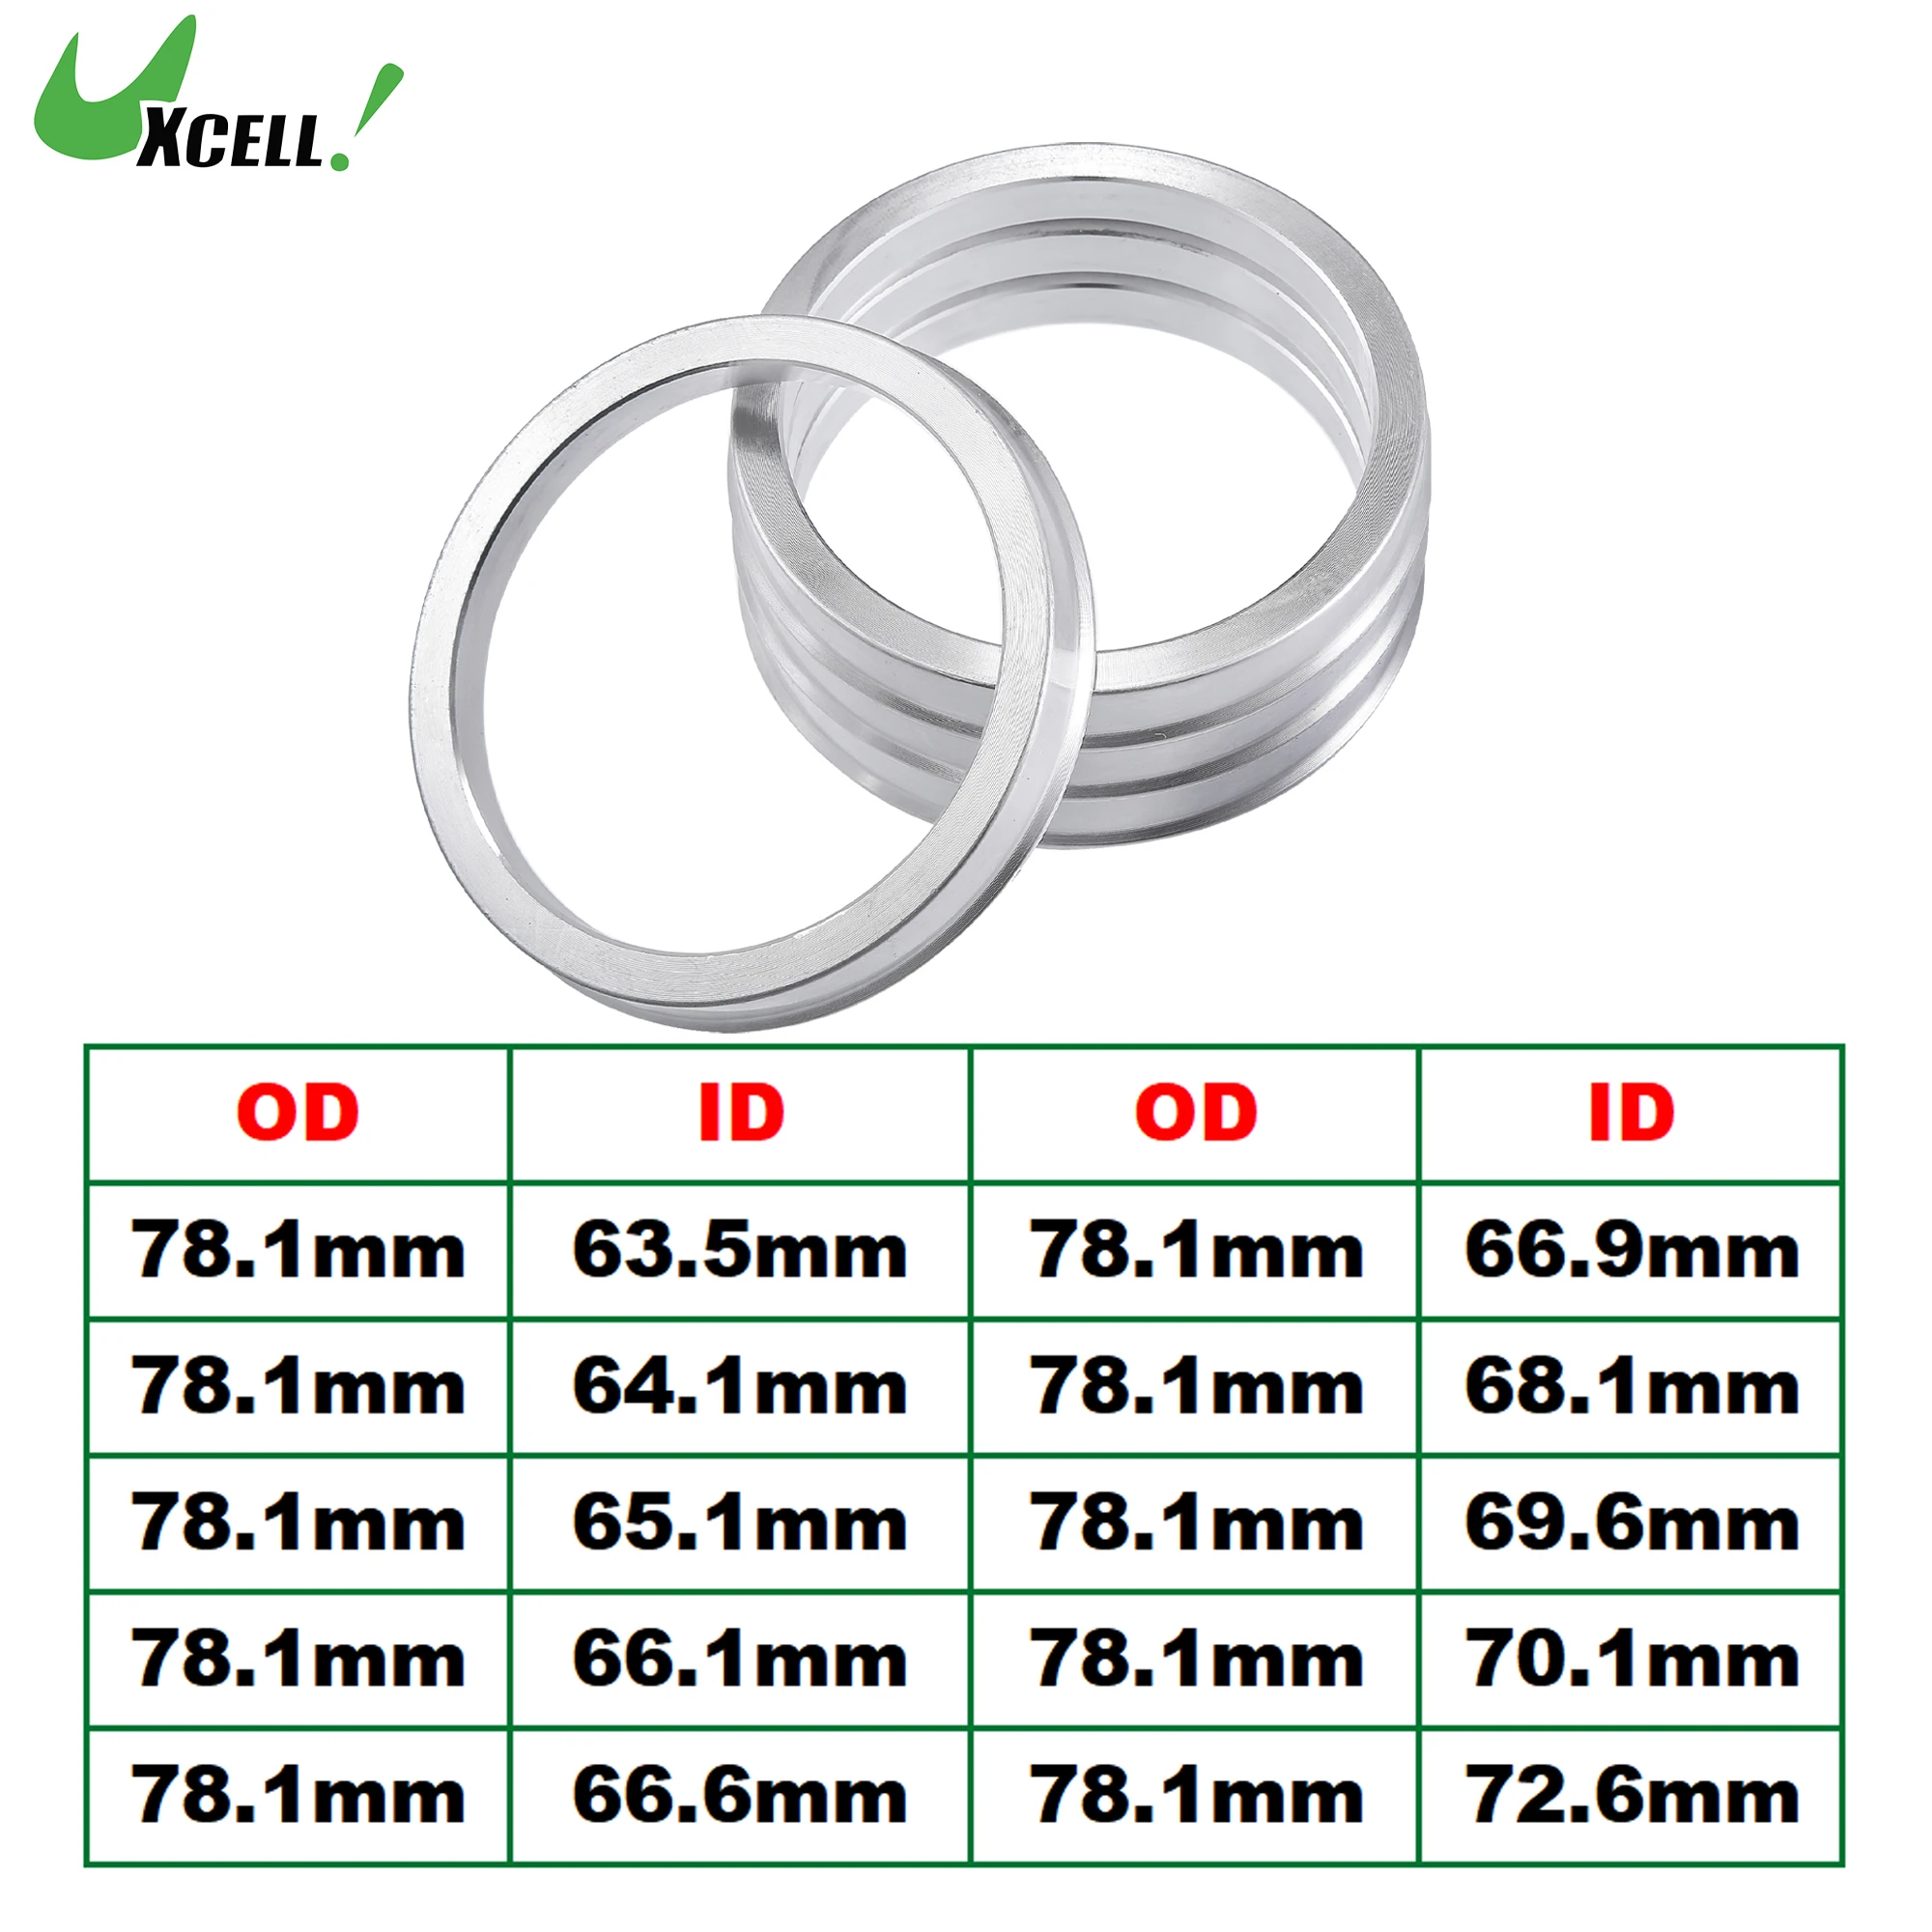 

UXCELL 4pcs OD 78.1mm to ID 63.5mm 64.1mm 66.1mm 66.9mm 72.6mm Car Hub Centric Rings Wheel Bore Center Spacer Accessories